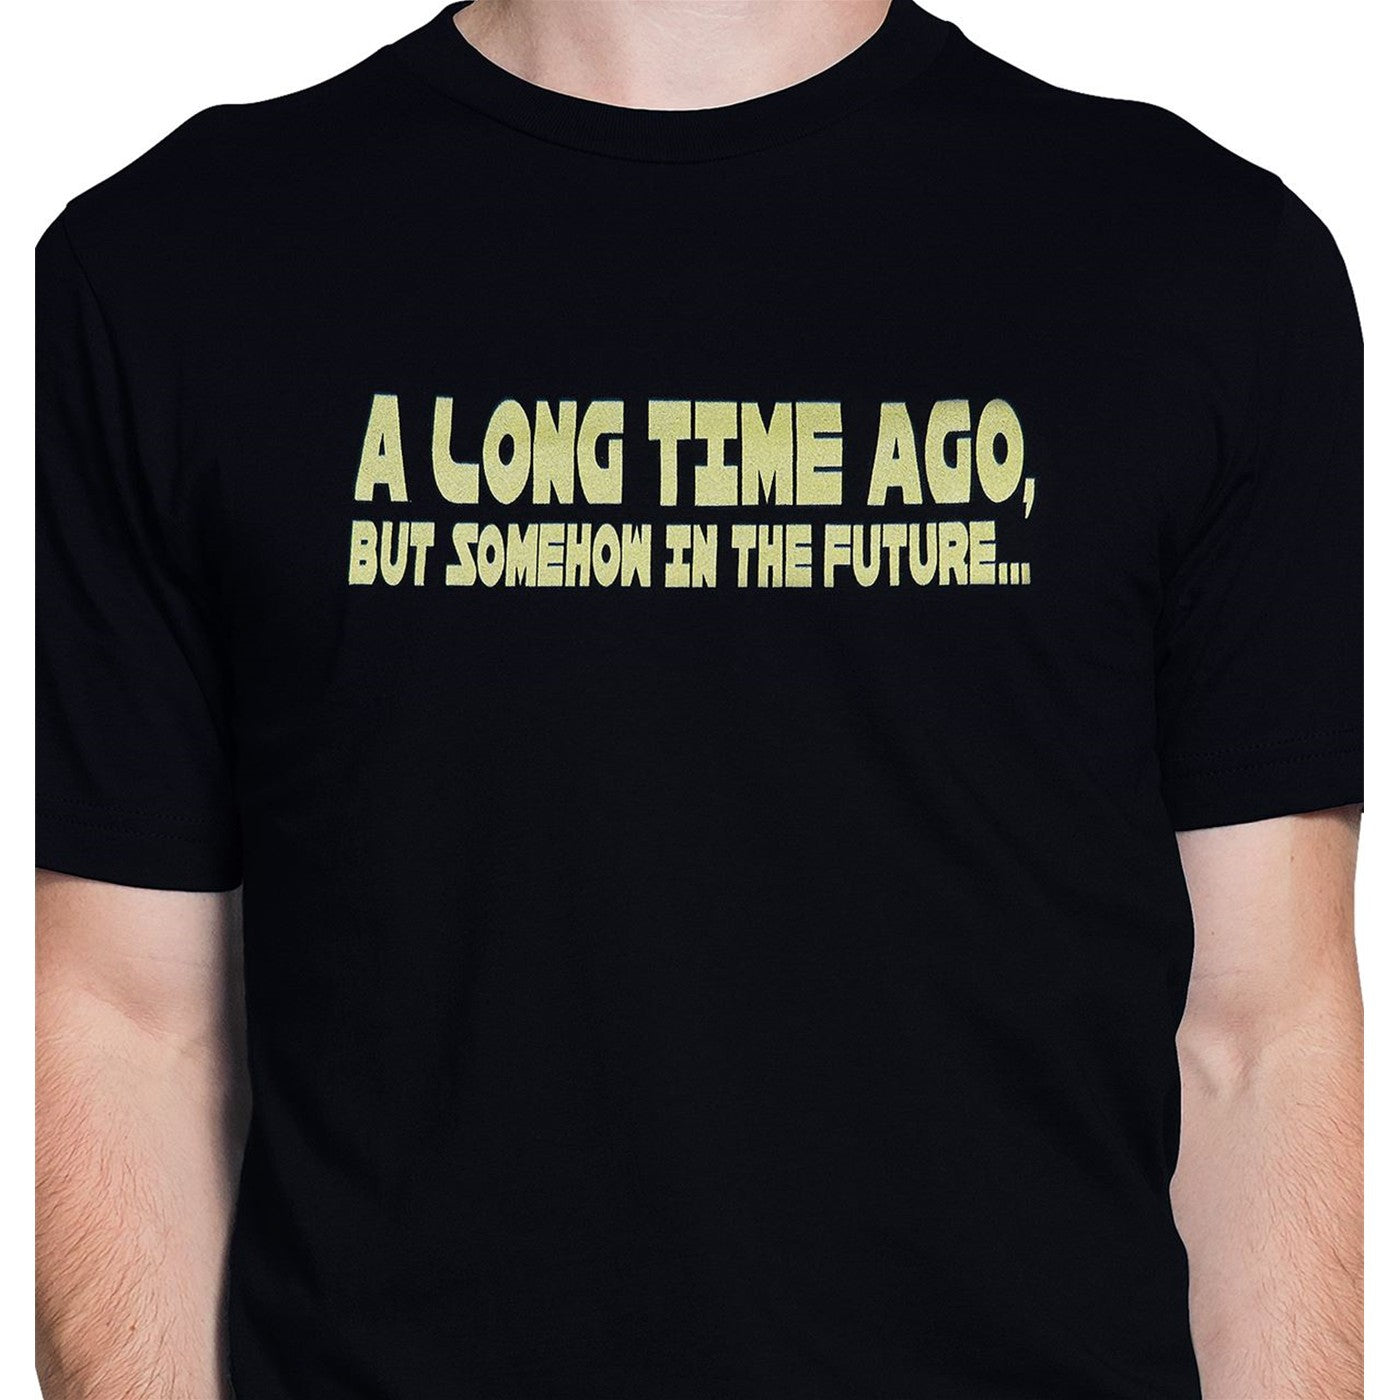 Long Time Ago but Somehow in the Future Men's T-Shirt